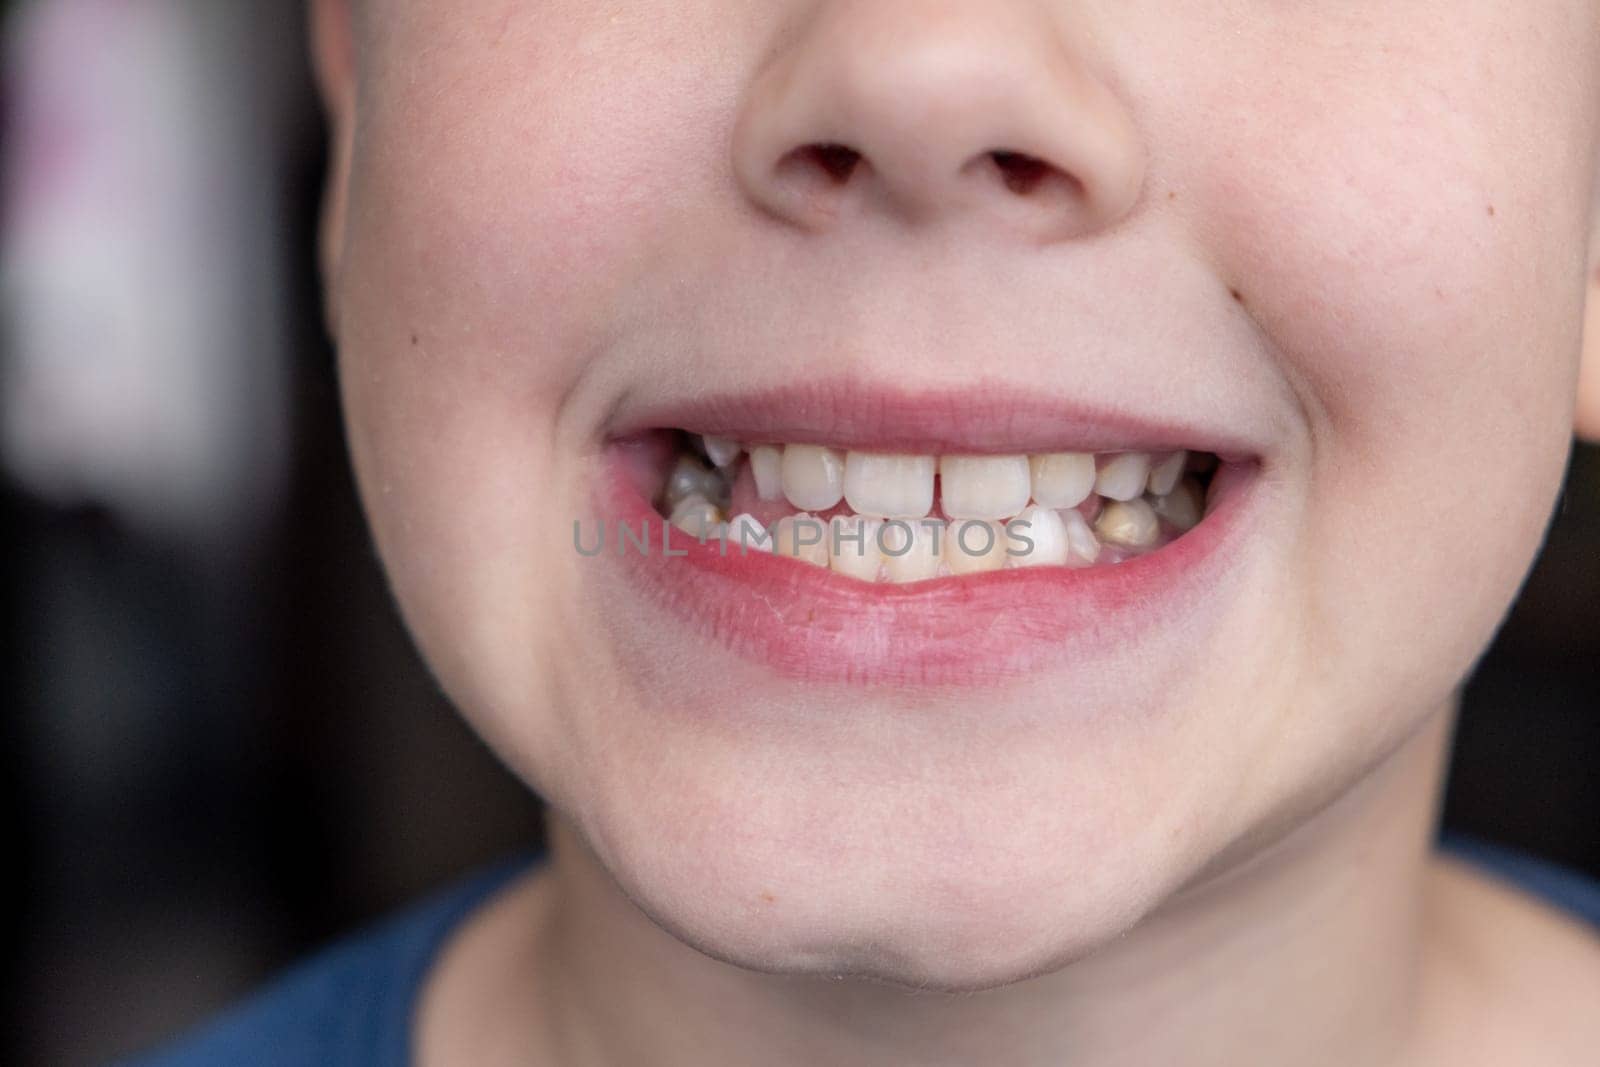 Child's crooked teeth. Young man showing crooked growing teeth. The child needs to go to the dentist to install braces.